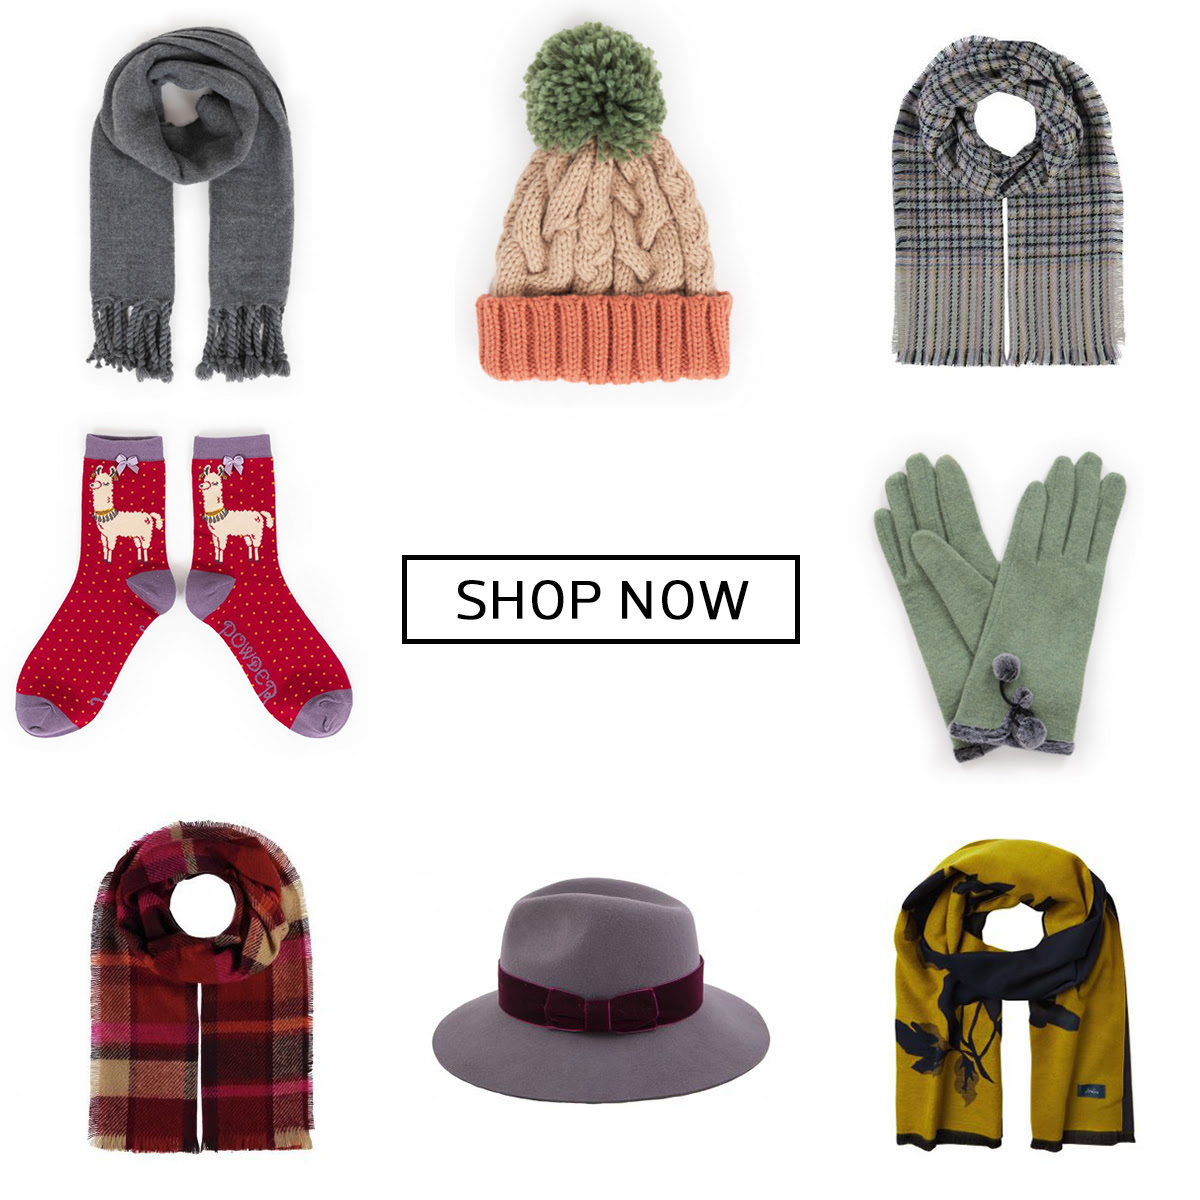 Kilkenny Shop - Winter Warmers Sale! In Store and Online